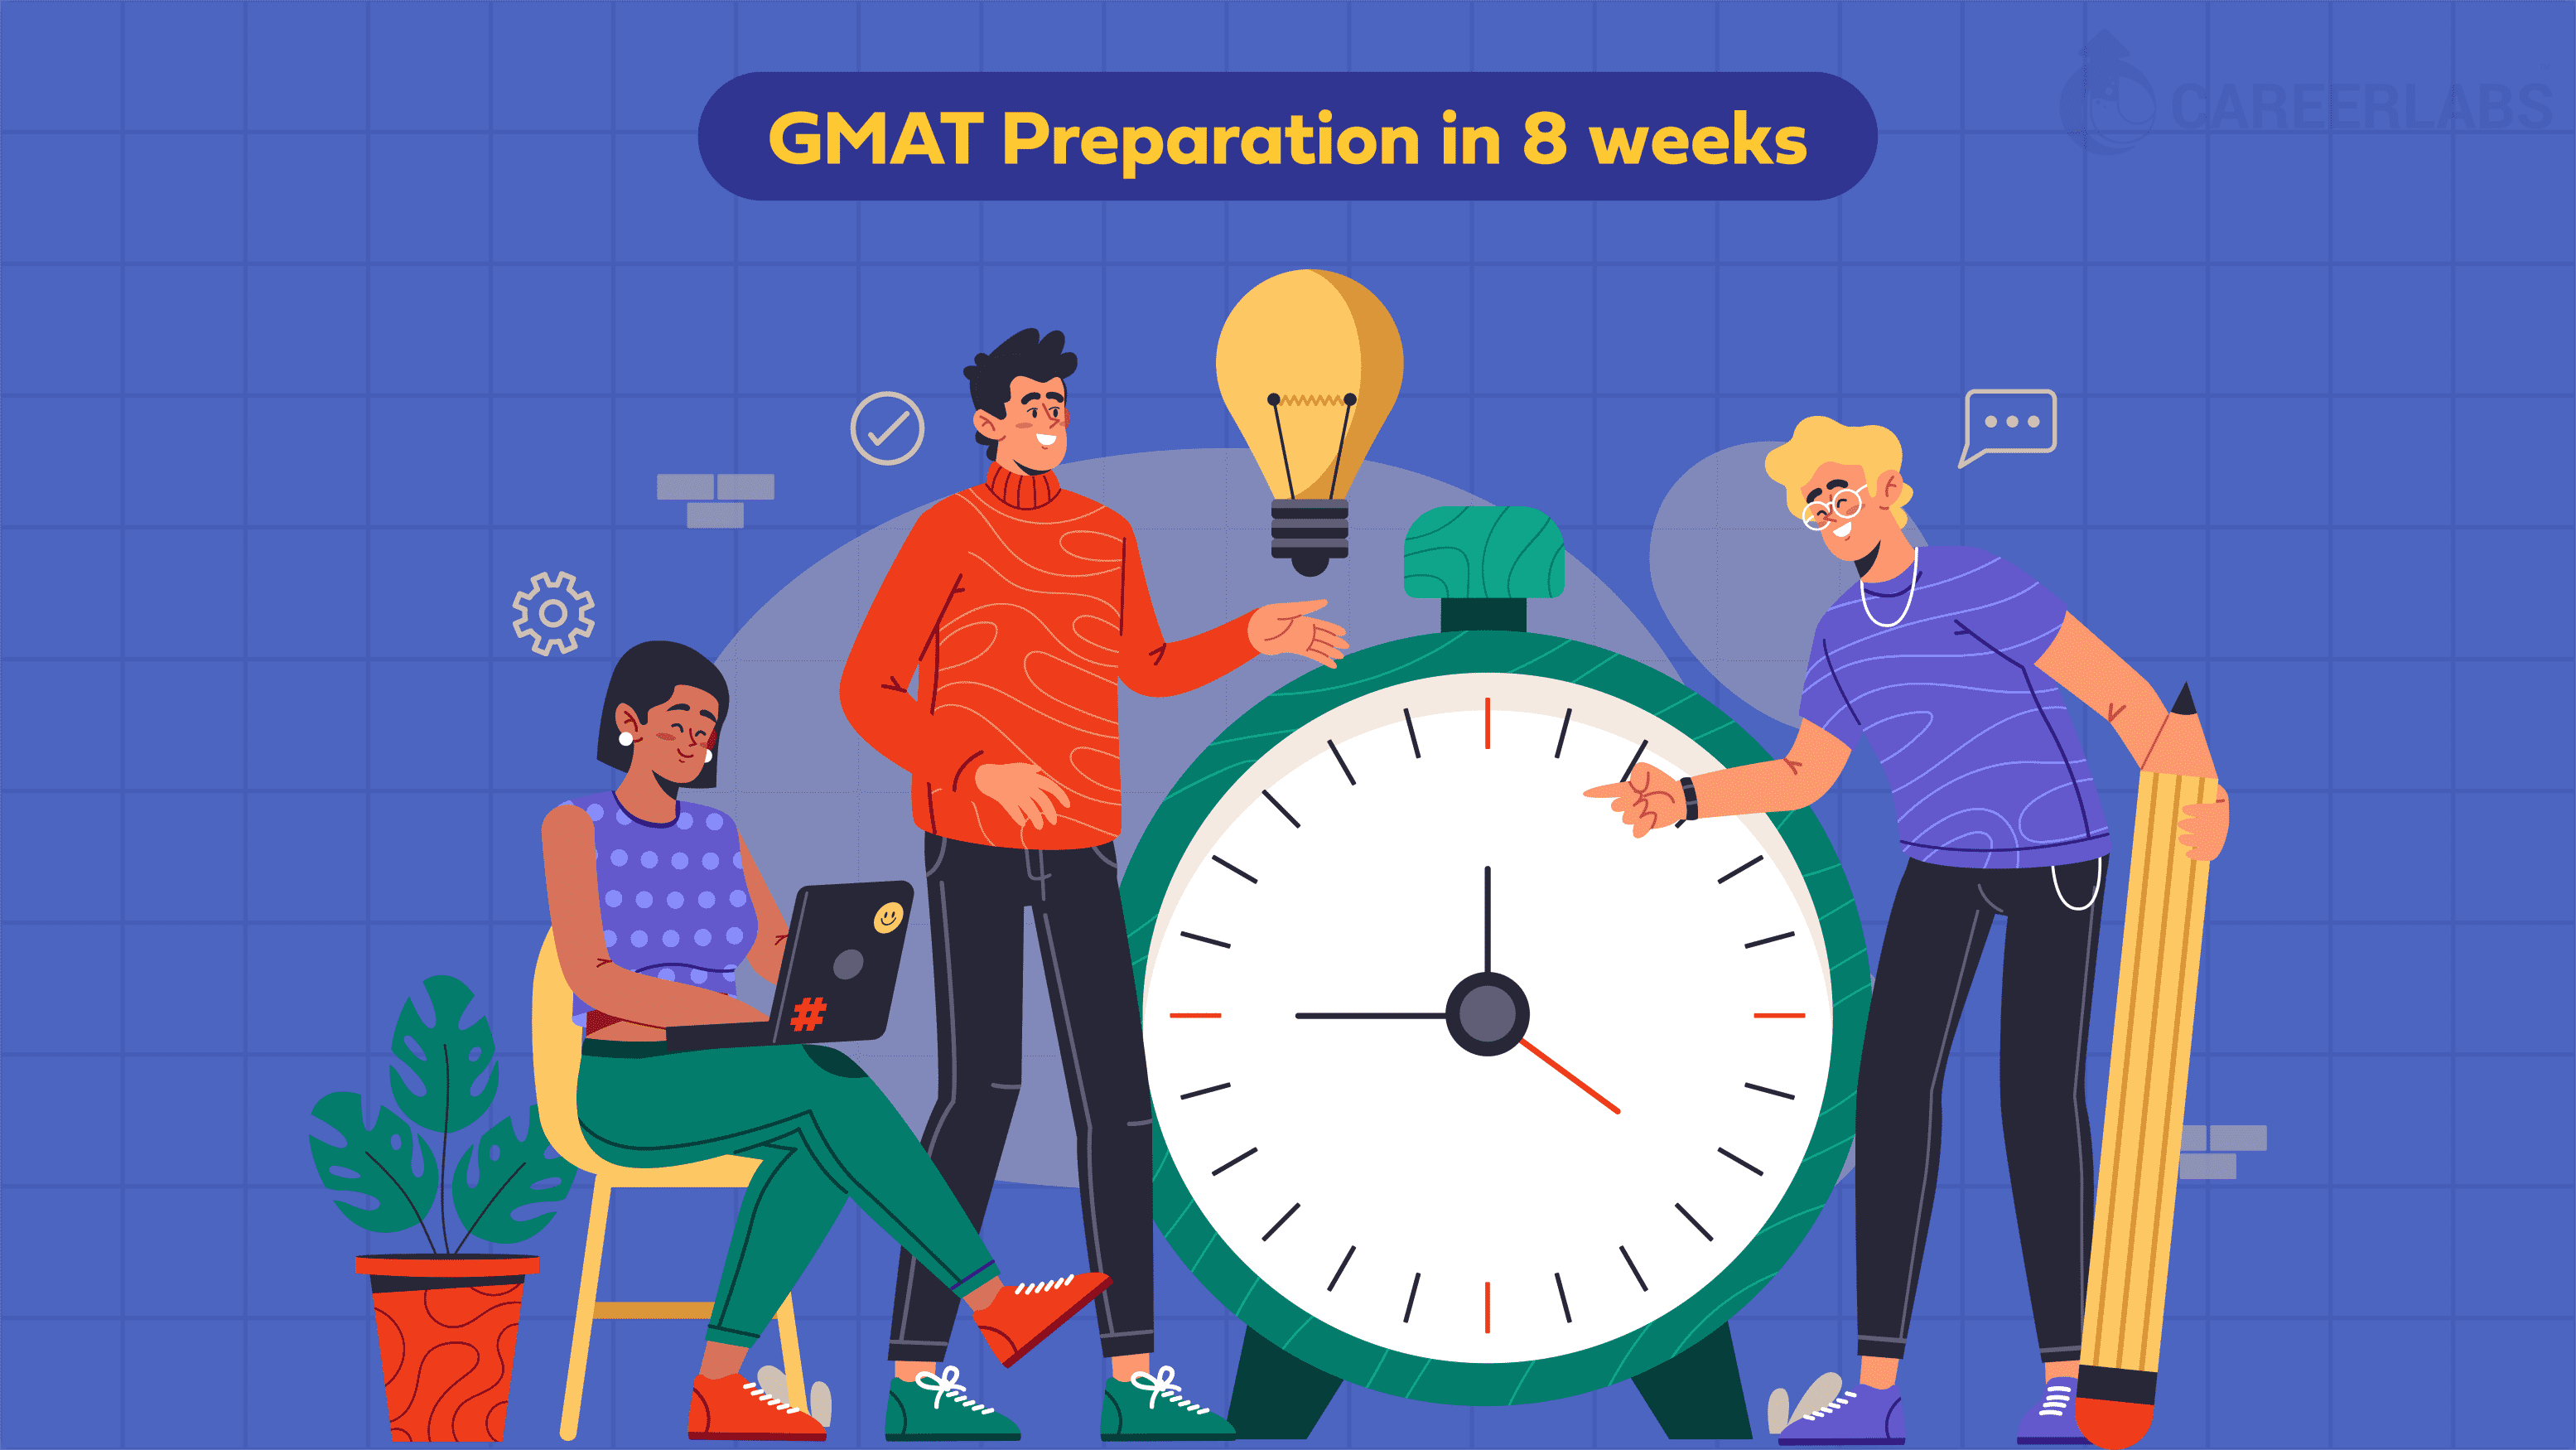 How to prepare for GMAT in 8 Weeks?